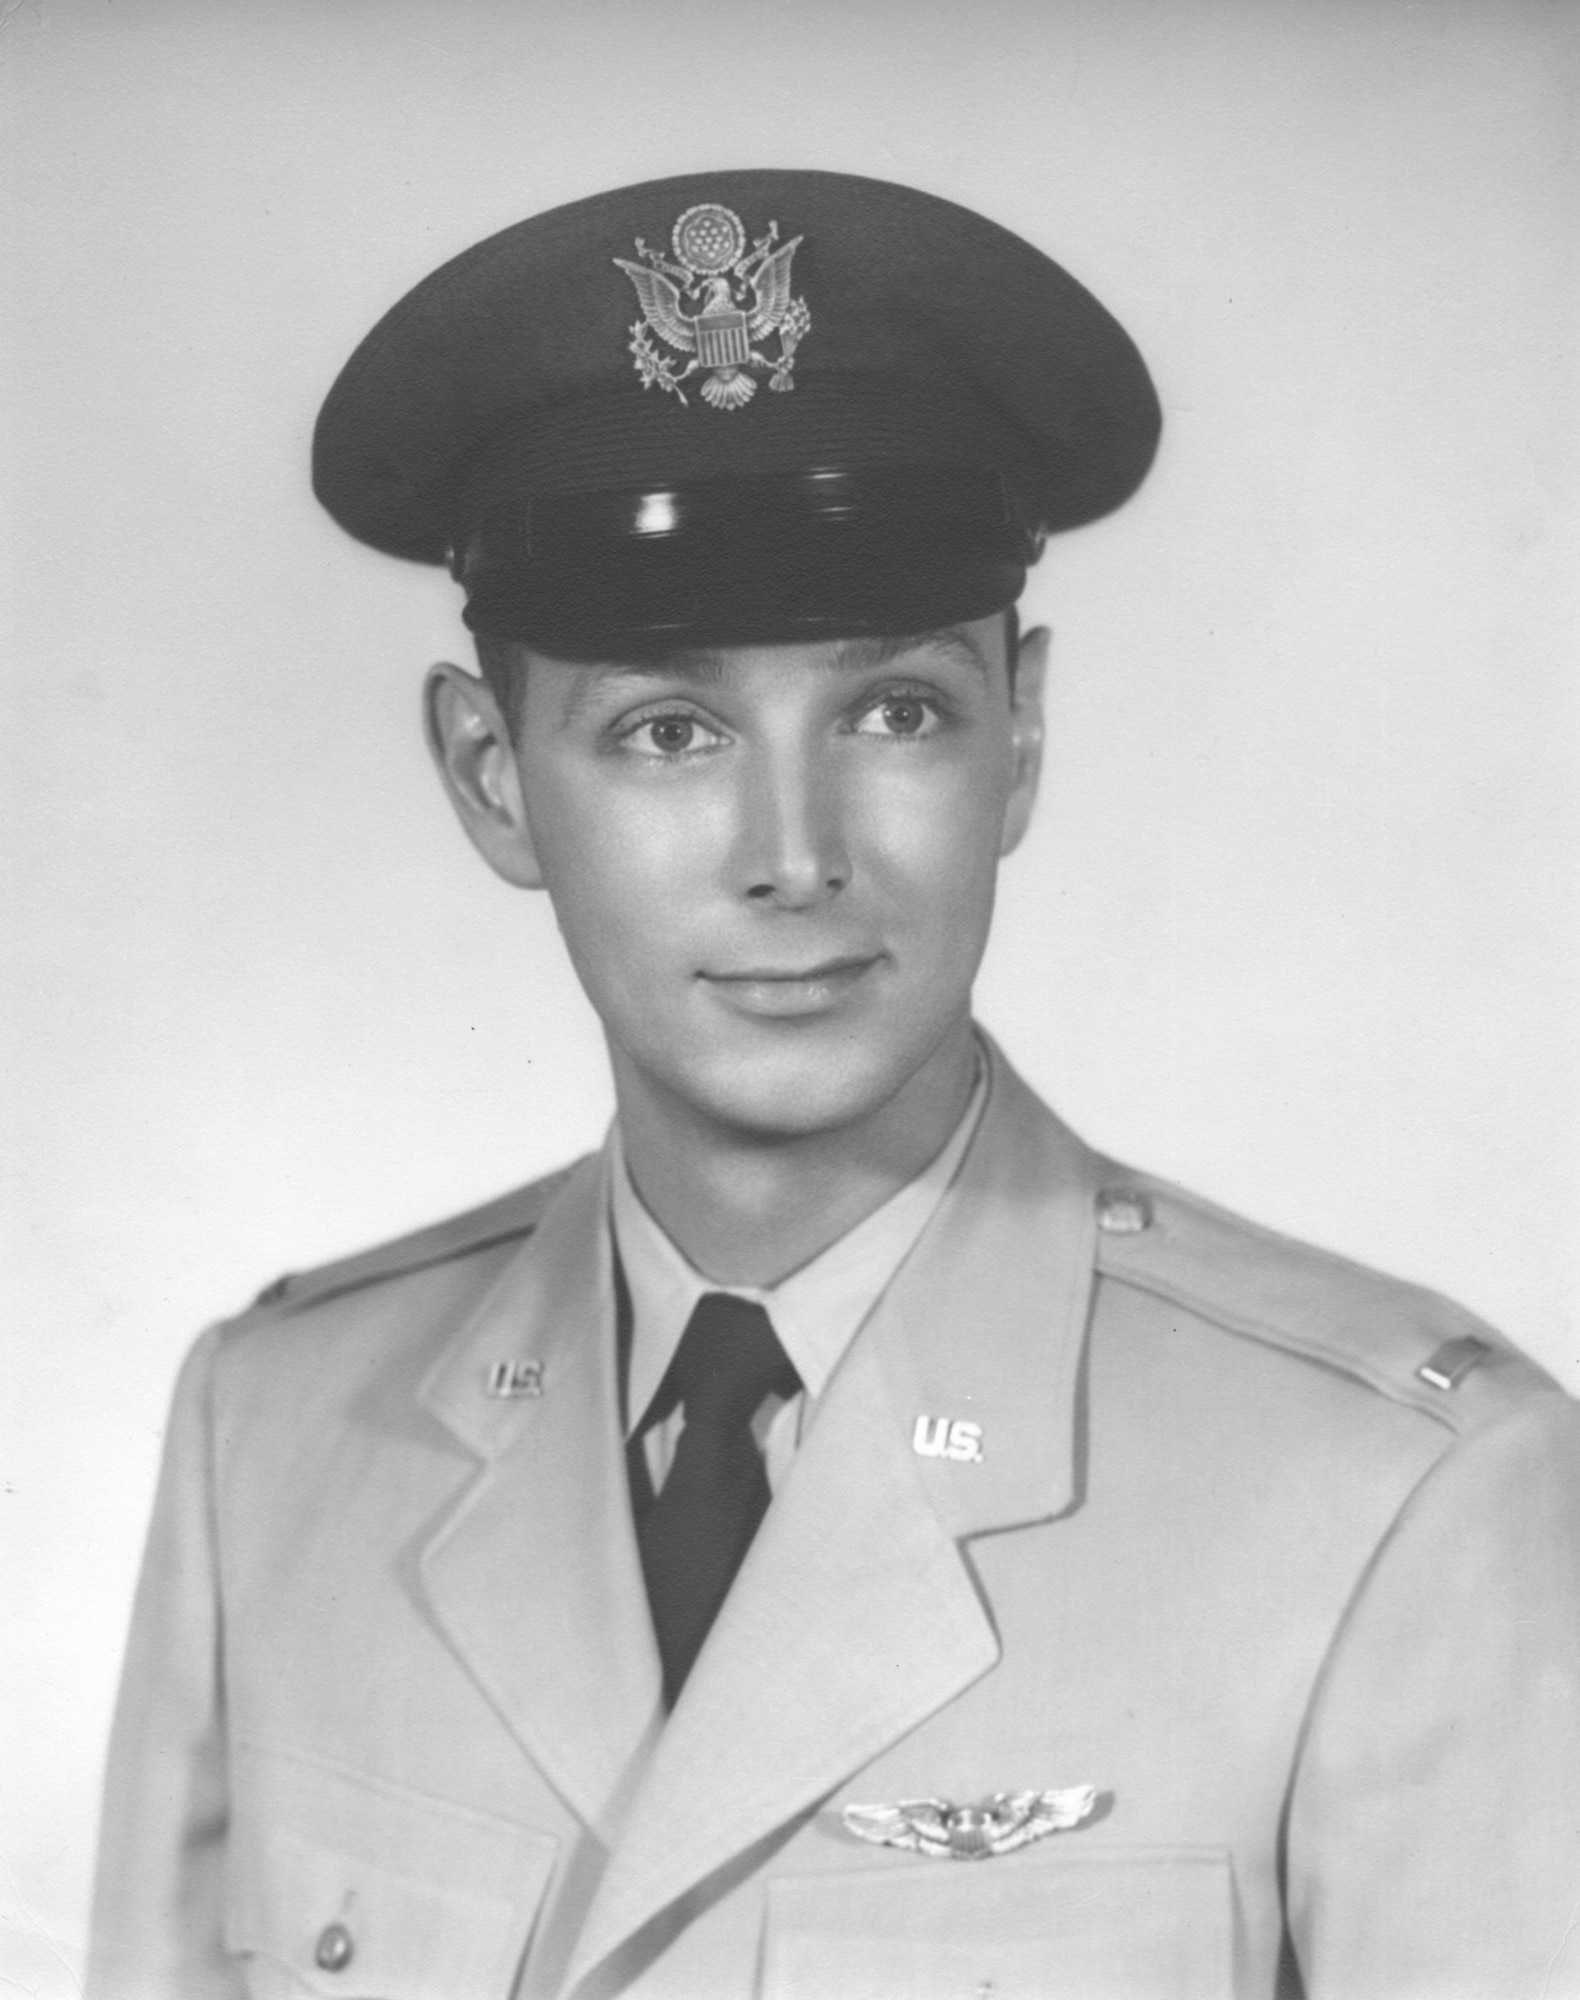 This portrait of James Cunningham was taken in 1955 during his time serving with the U.S. Air Force. Cunningham worked at Arnold Air Force Base, Tenn., prior to joining the Air Force in 1953 and resumed his career at Arnold after leaving the service in 1958. Cunningham, honored as an Arnold Engineering Development Complex Fellow in 2006, passed away May 11, 2023. He spent more than 40 years of his 55-year career at Arnold Air Force Base, Tenn. (U.S. Air Force photo)